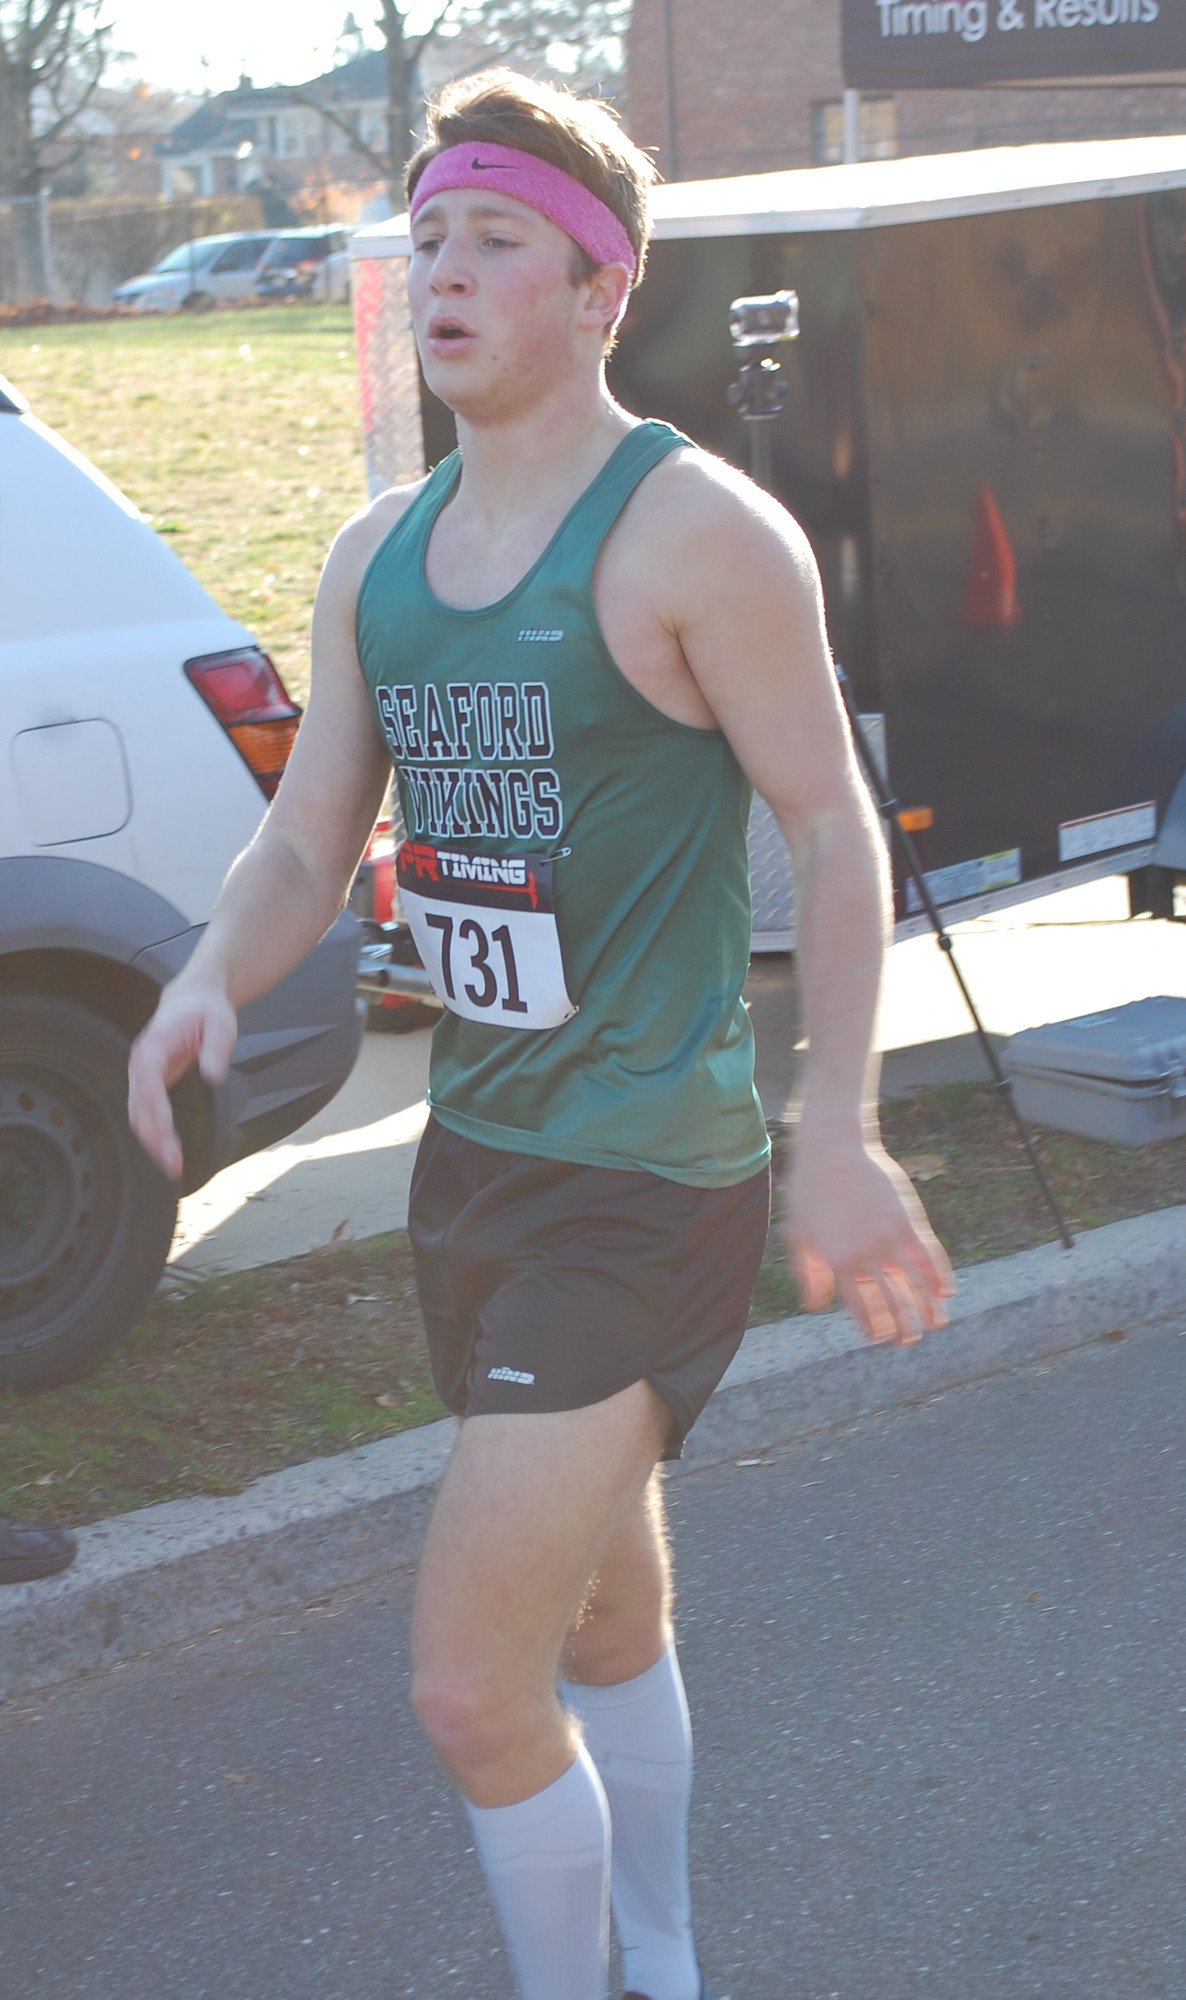 Ben Varnas, who runs track and cross-country for Seaford High School, placed third overall.